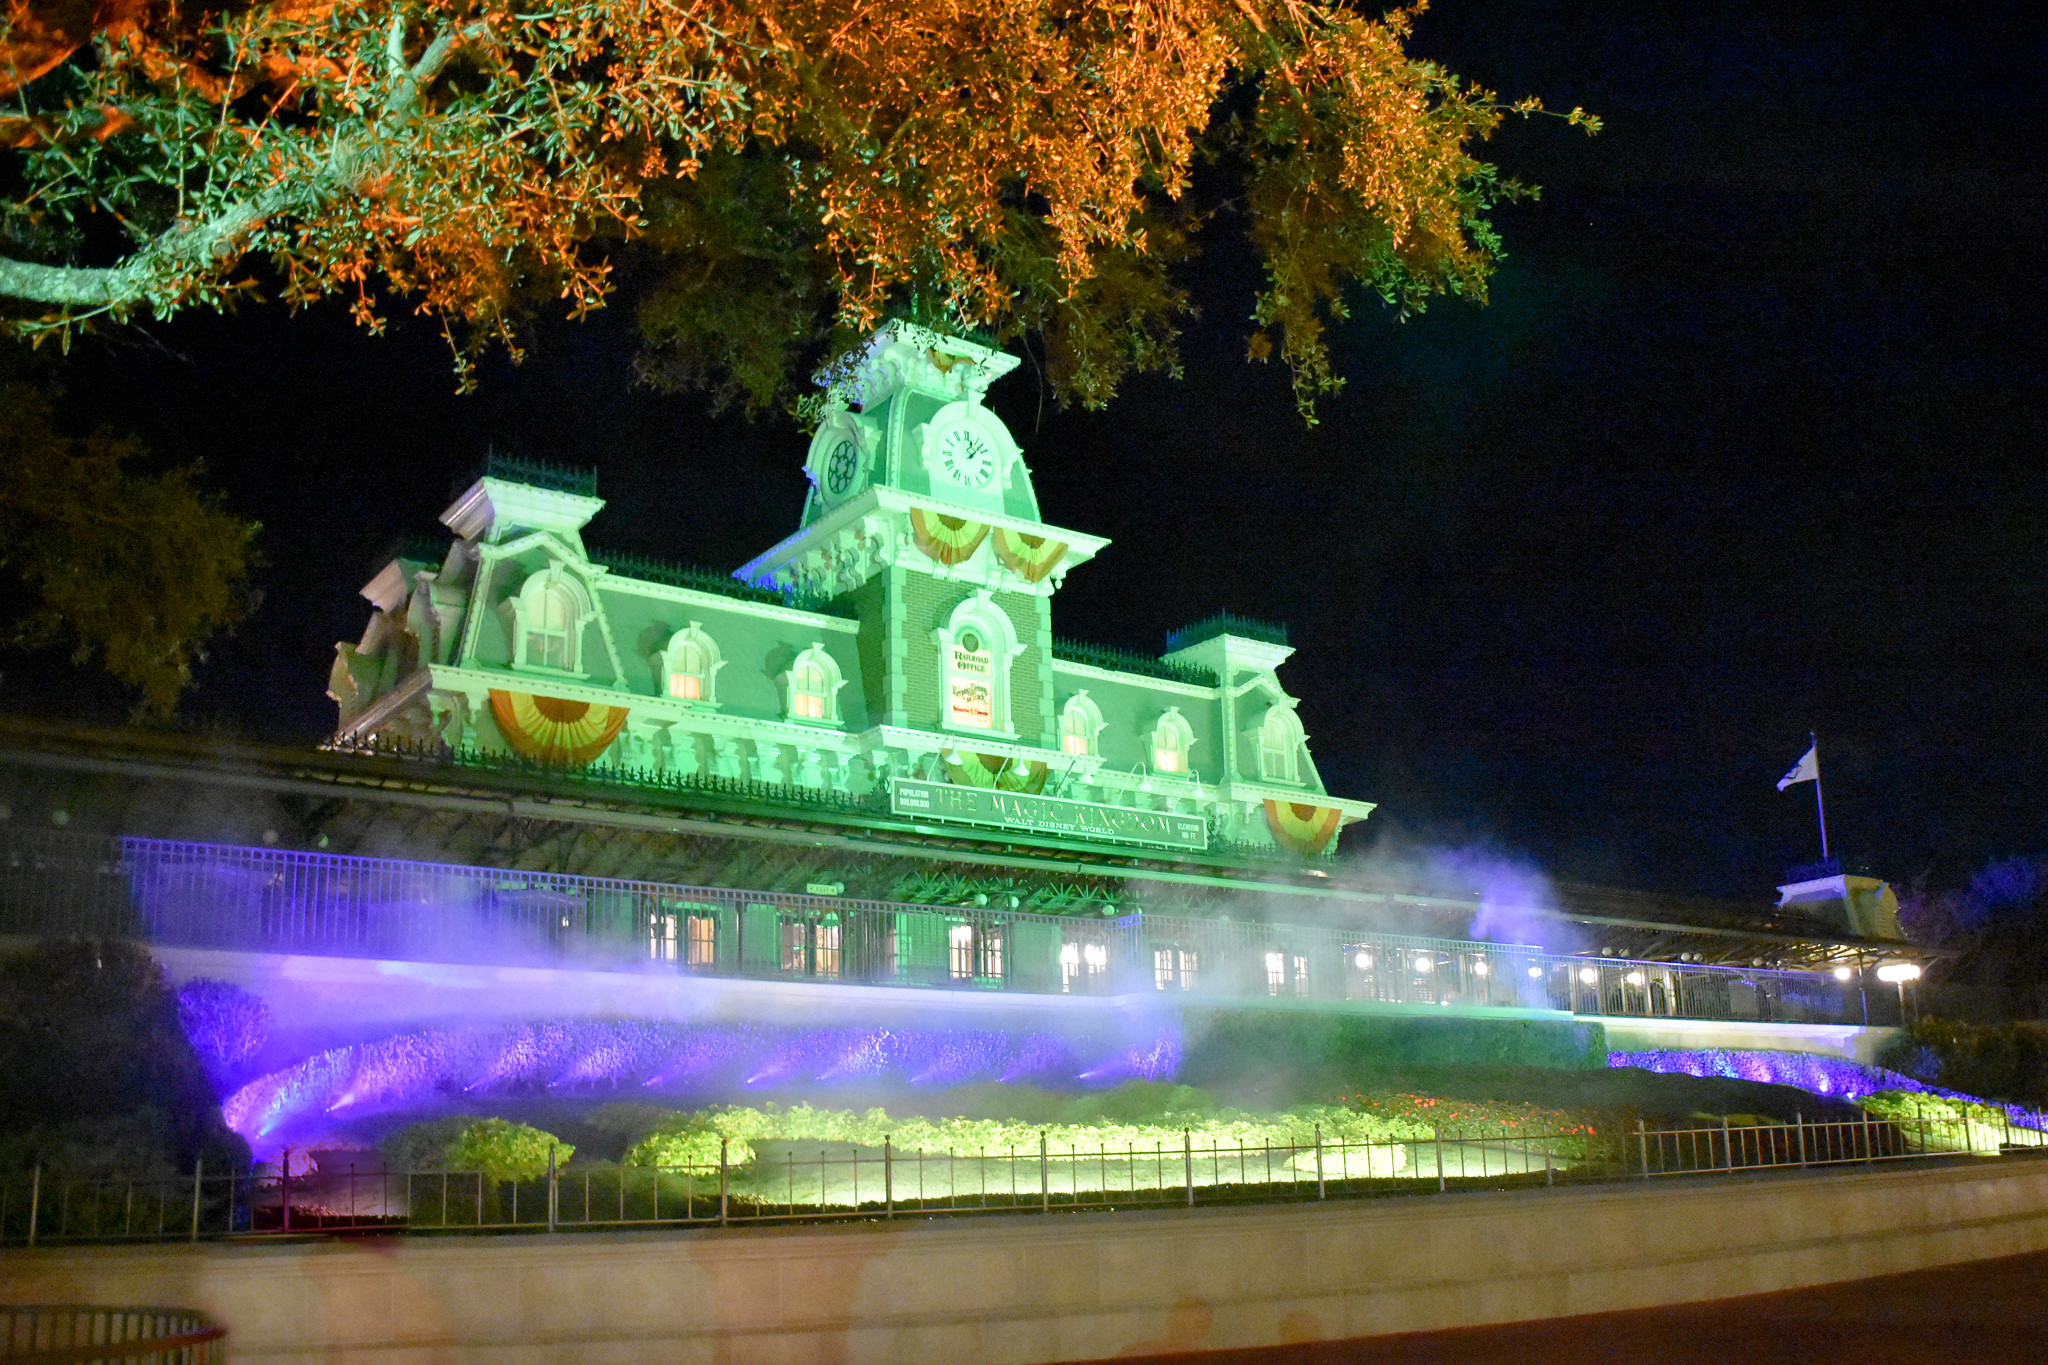 Magic Kingdom Train Station during Mickey's Not So Scary Halloween Party